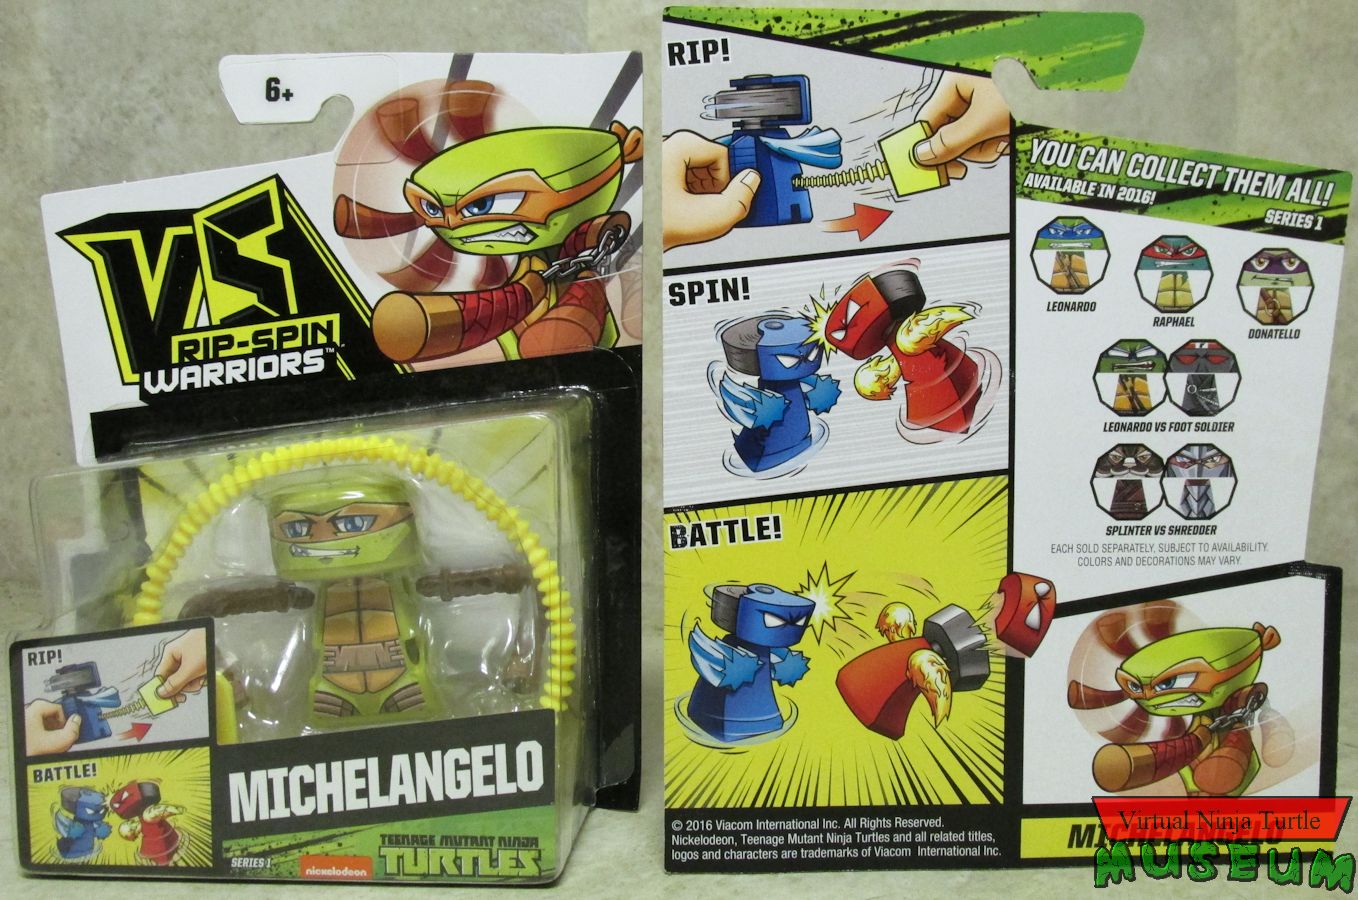 Rip-Spin Warriors Michelangelo card front and back